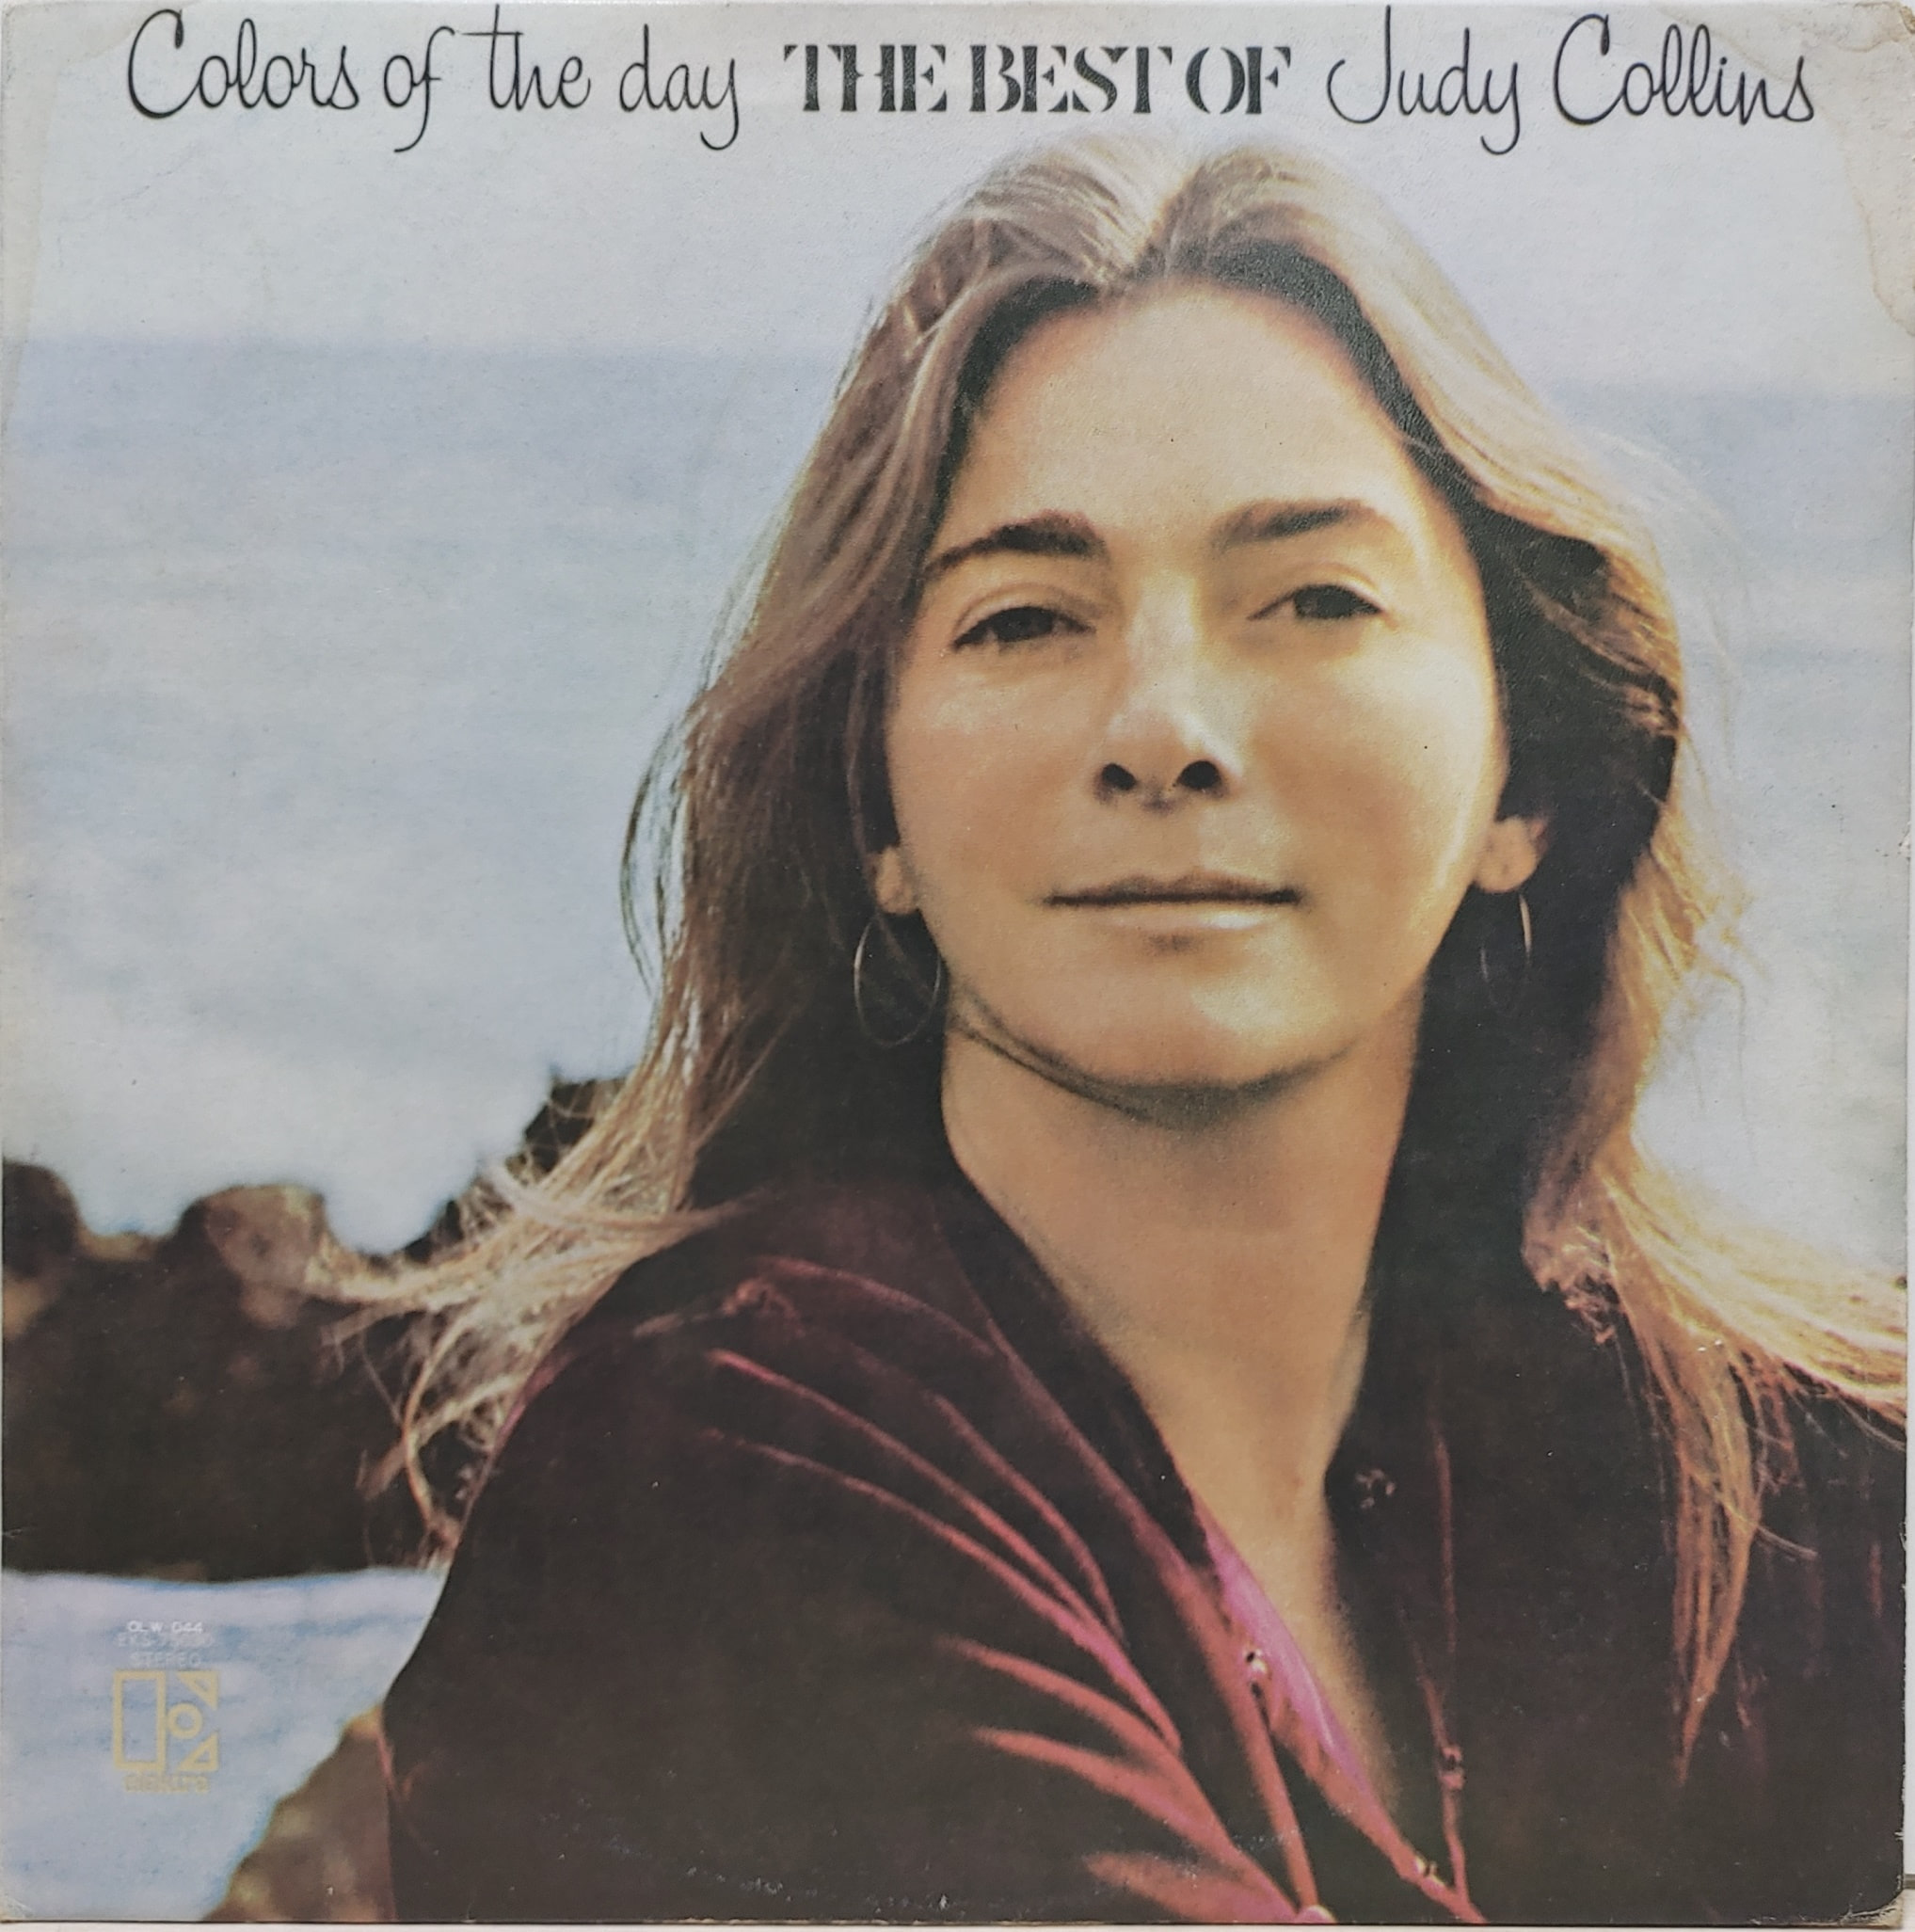 JUDY COLLINS / COLORS OF THE DAY THE BEST OF JUDY COLLINS